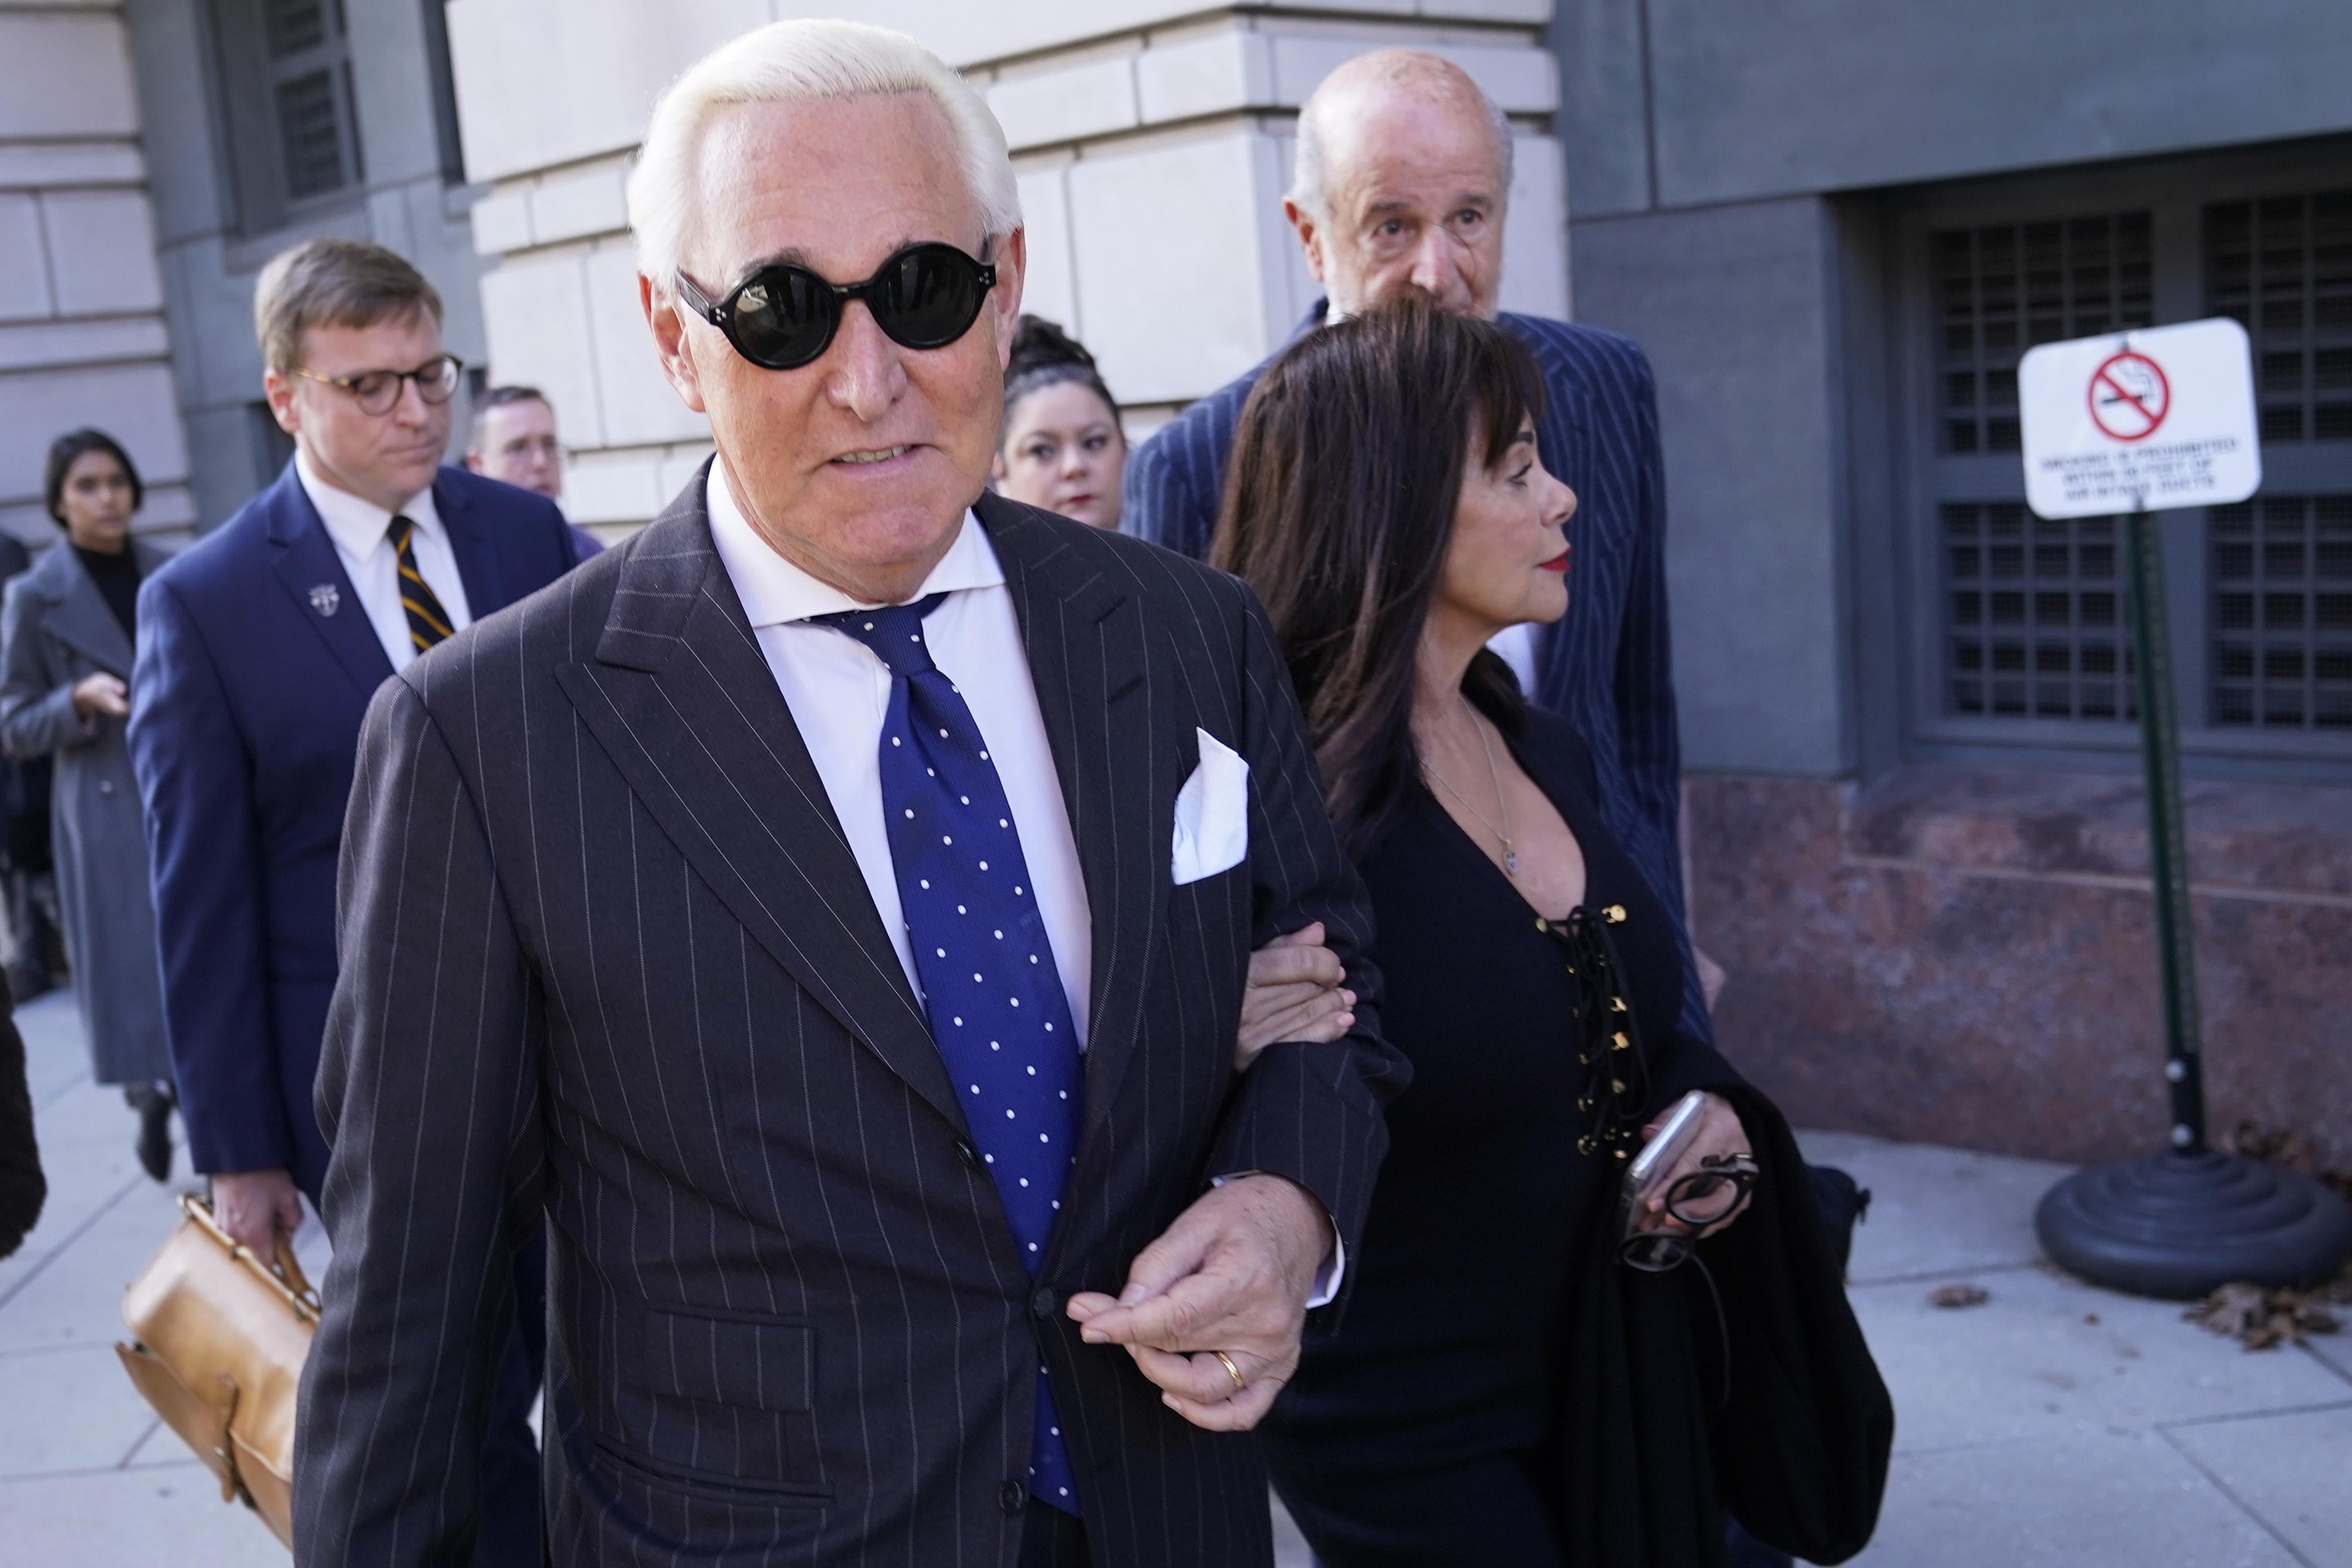 Roger Stone leaves a courthouse wearing some hip sunglasses and accompanied by his wife.